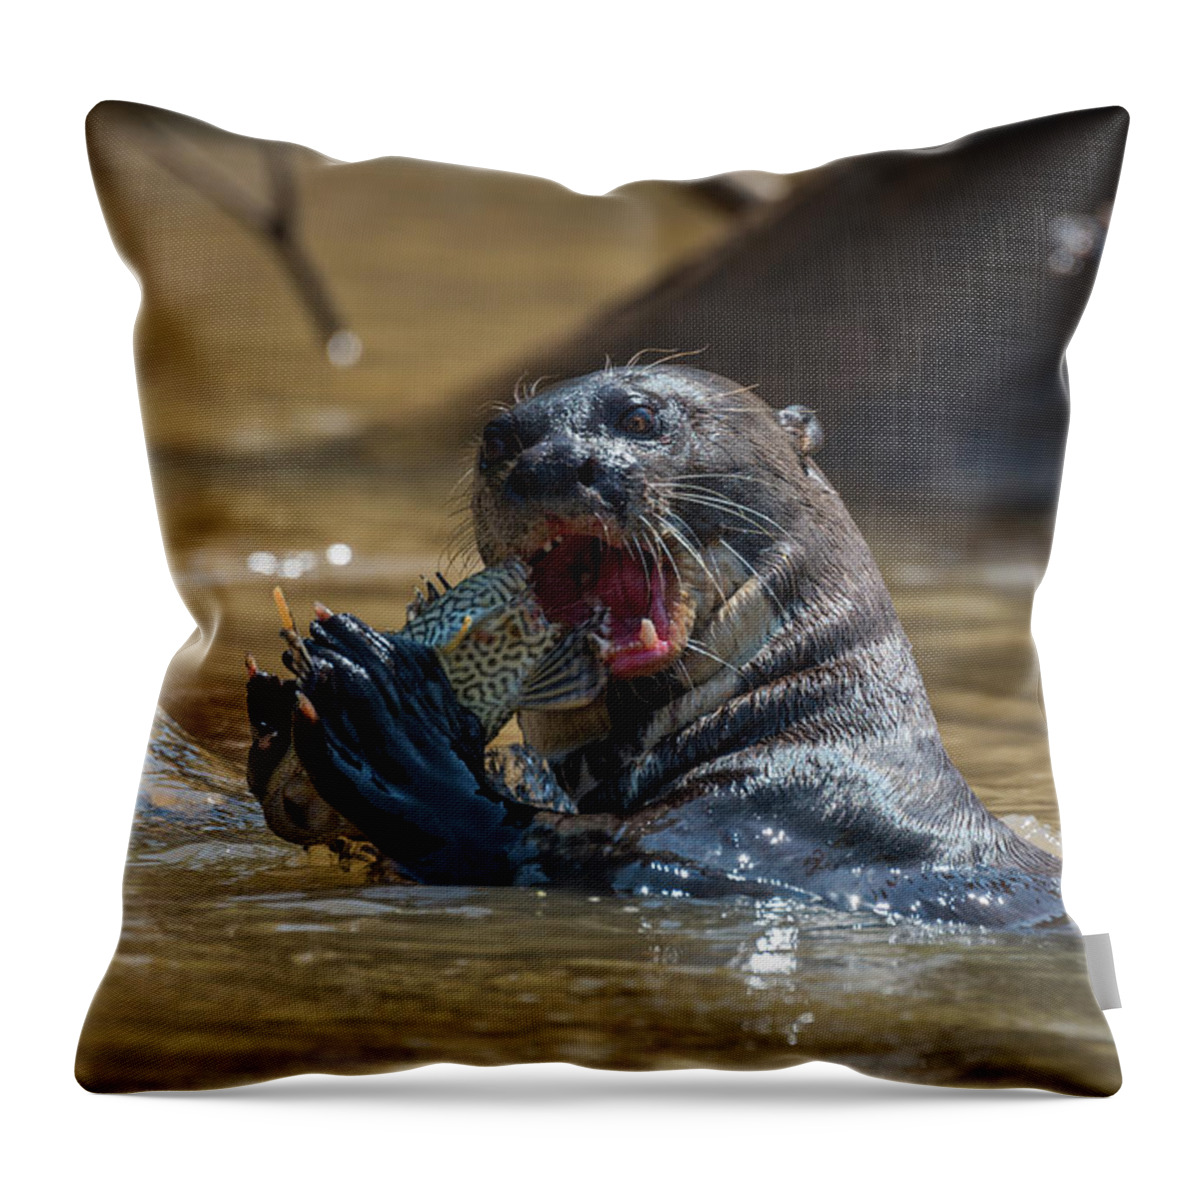 Giant river otter biting fish in river Throw Pillow